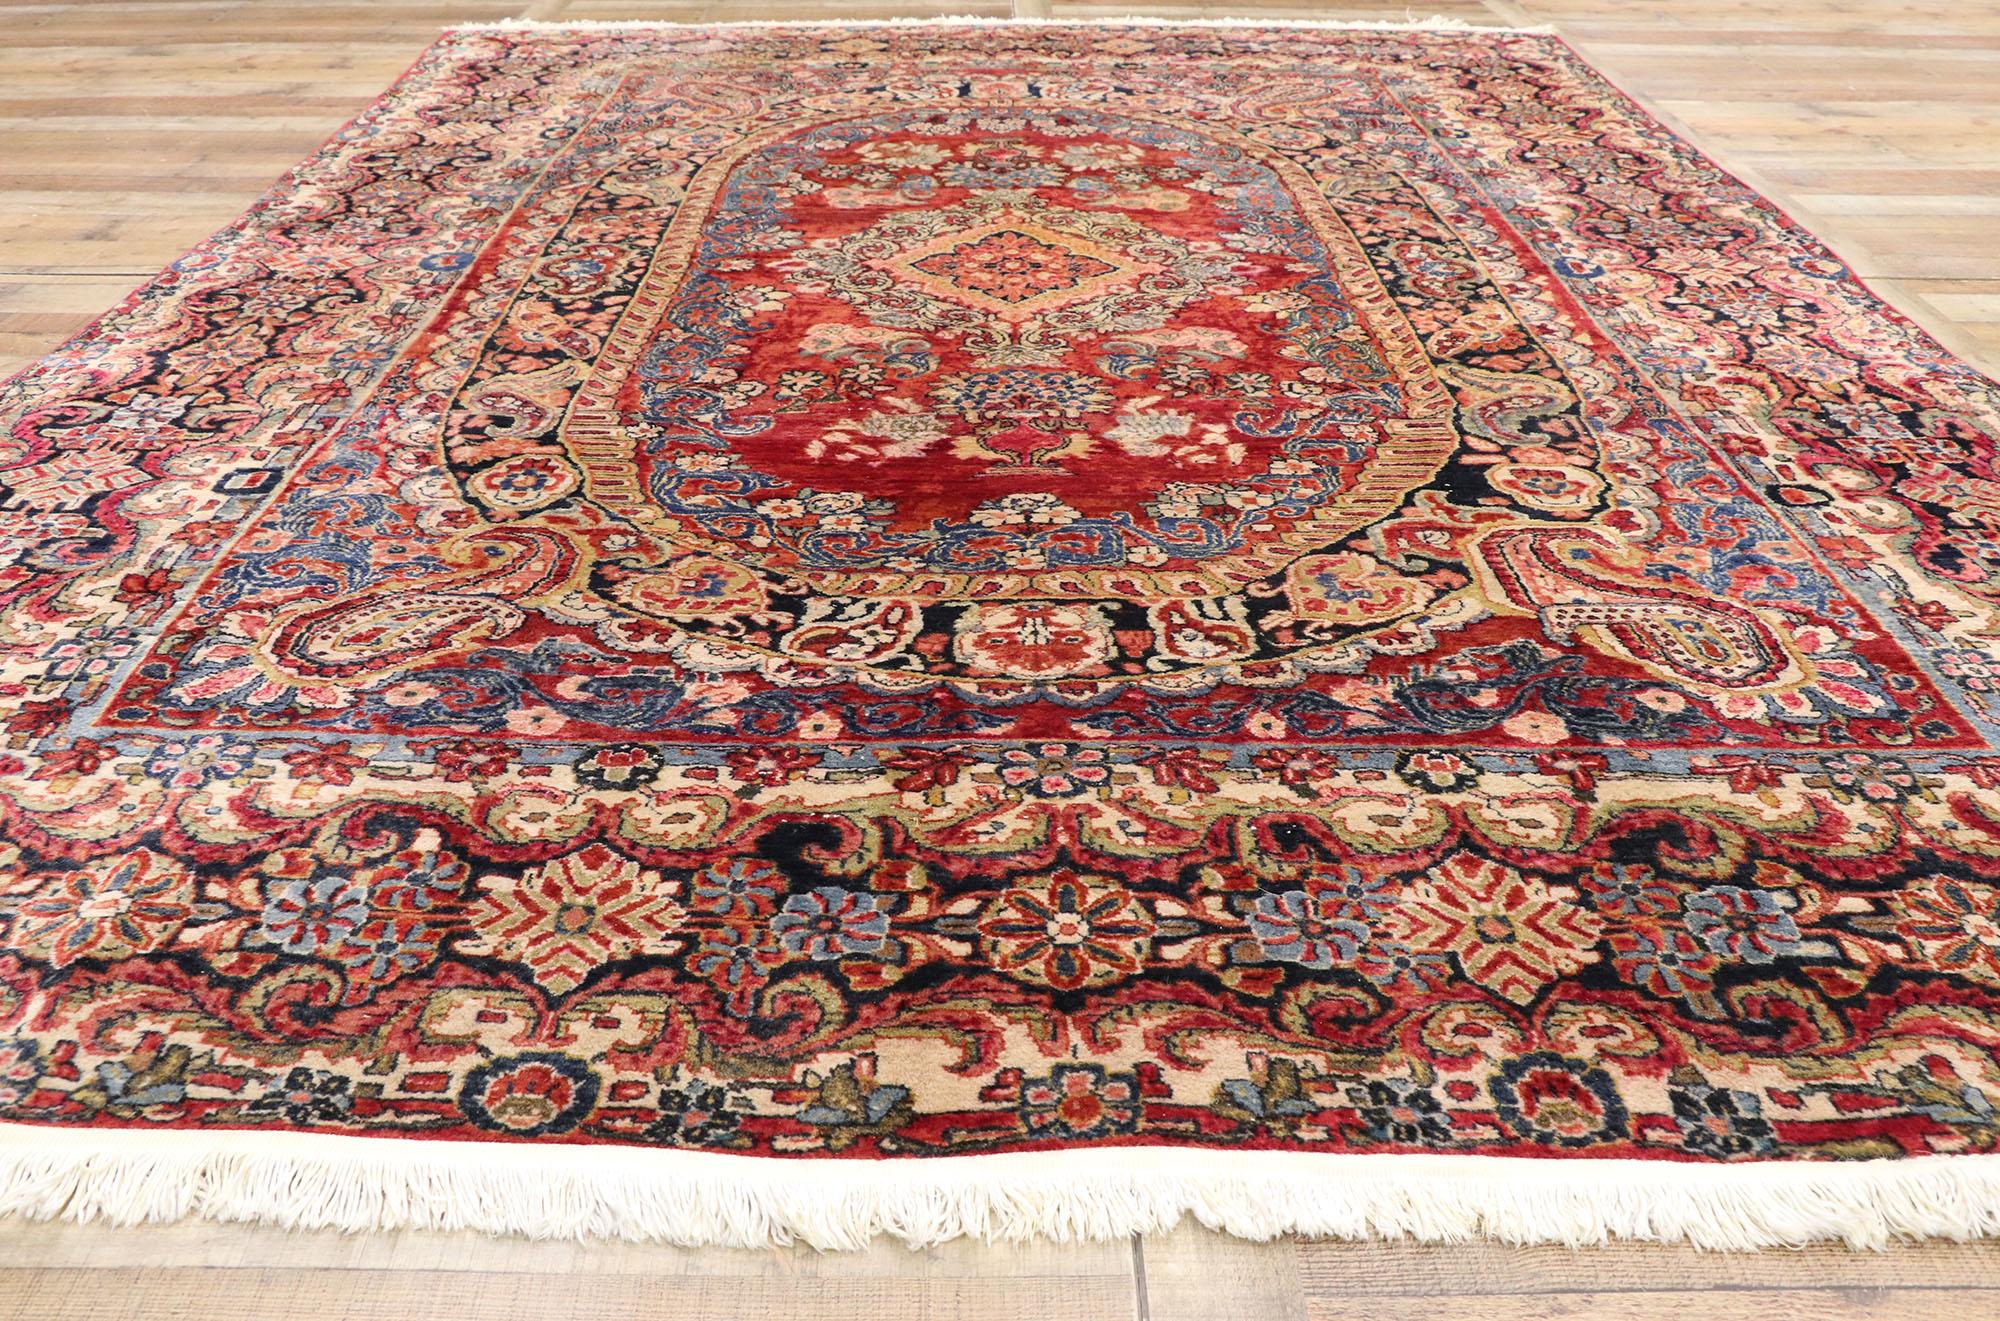 Wool Antique Persian Sarouk Rug with Floral Victorian Style